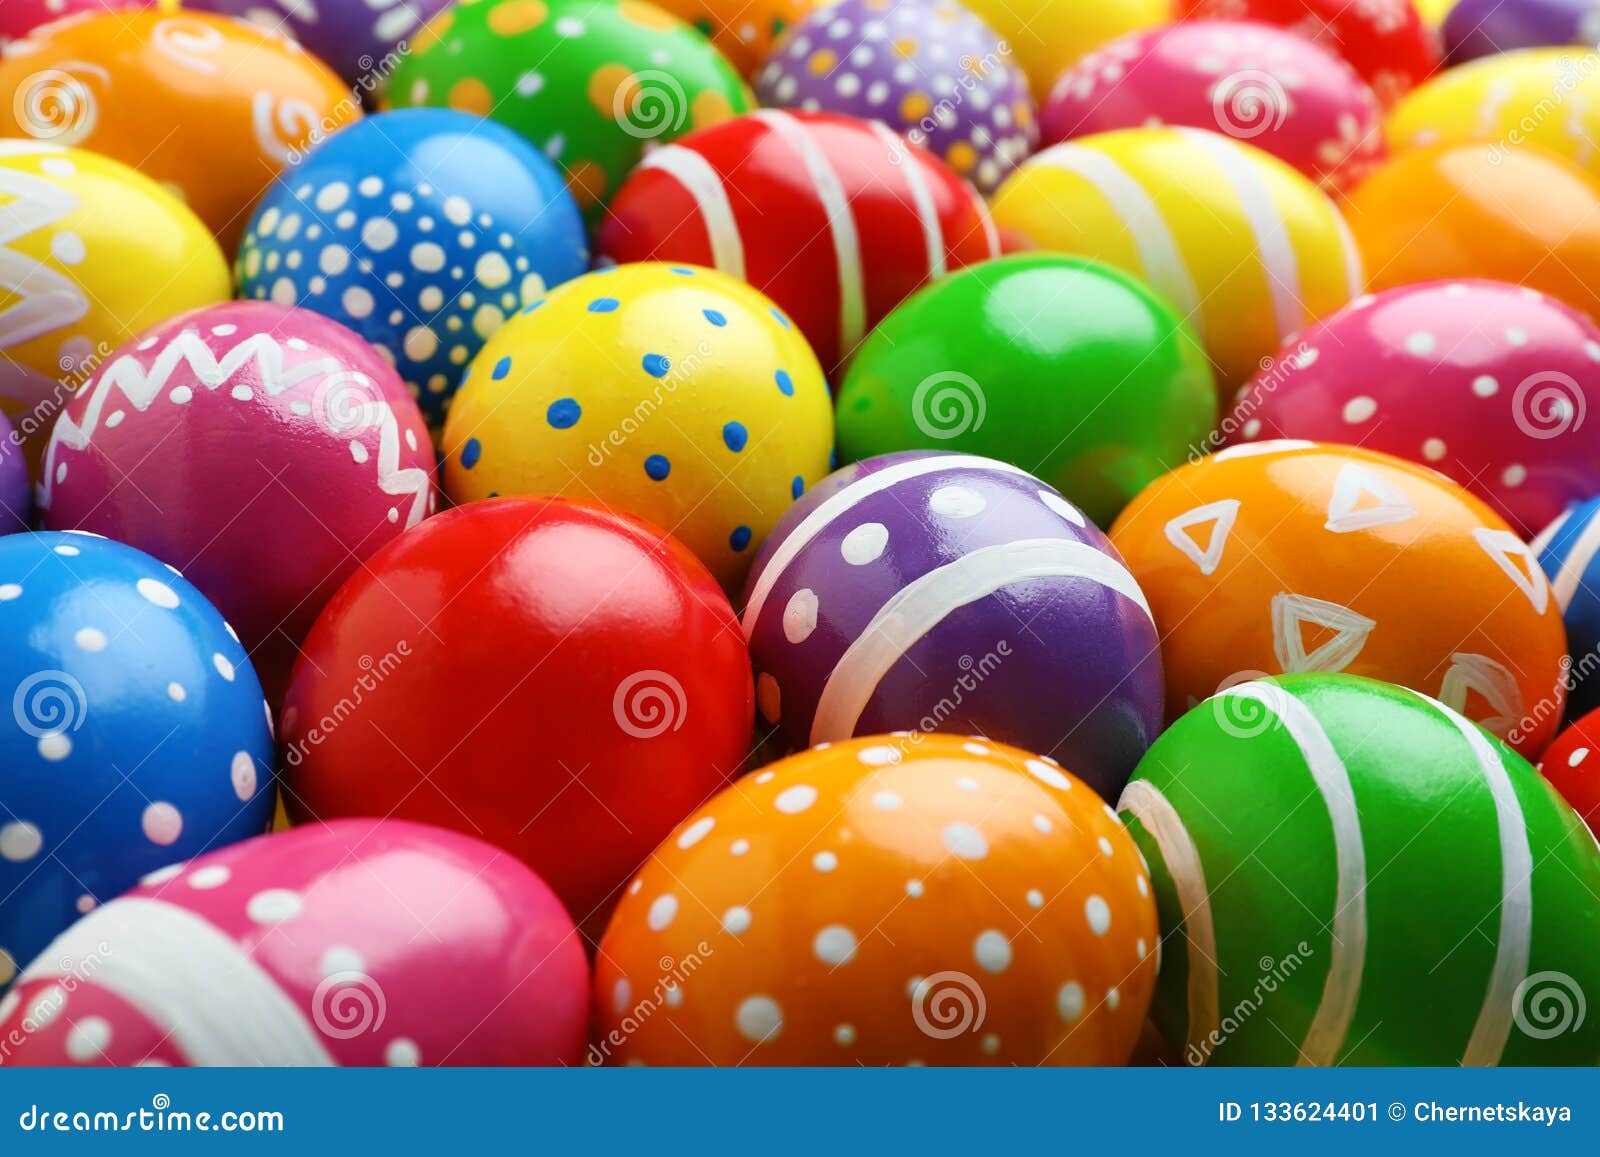 Many Decorated Easter Eggs As Background Stock Image - Image of food ...